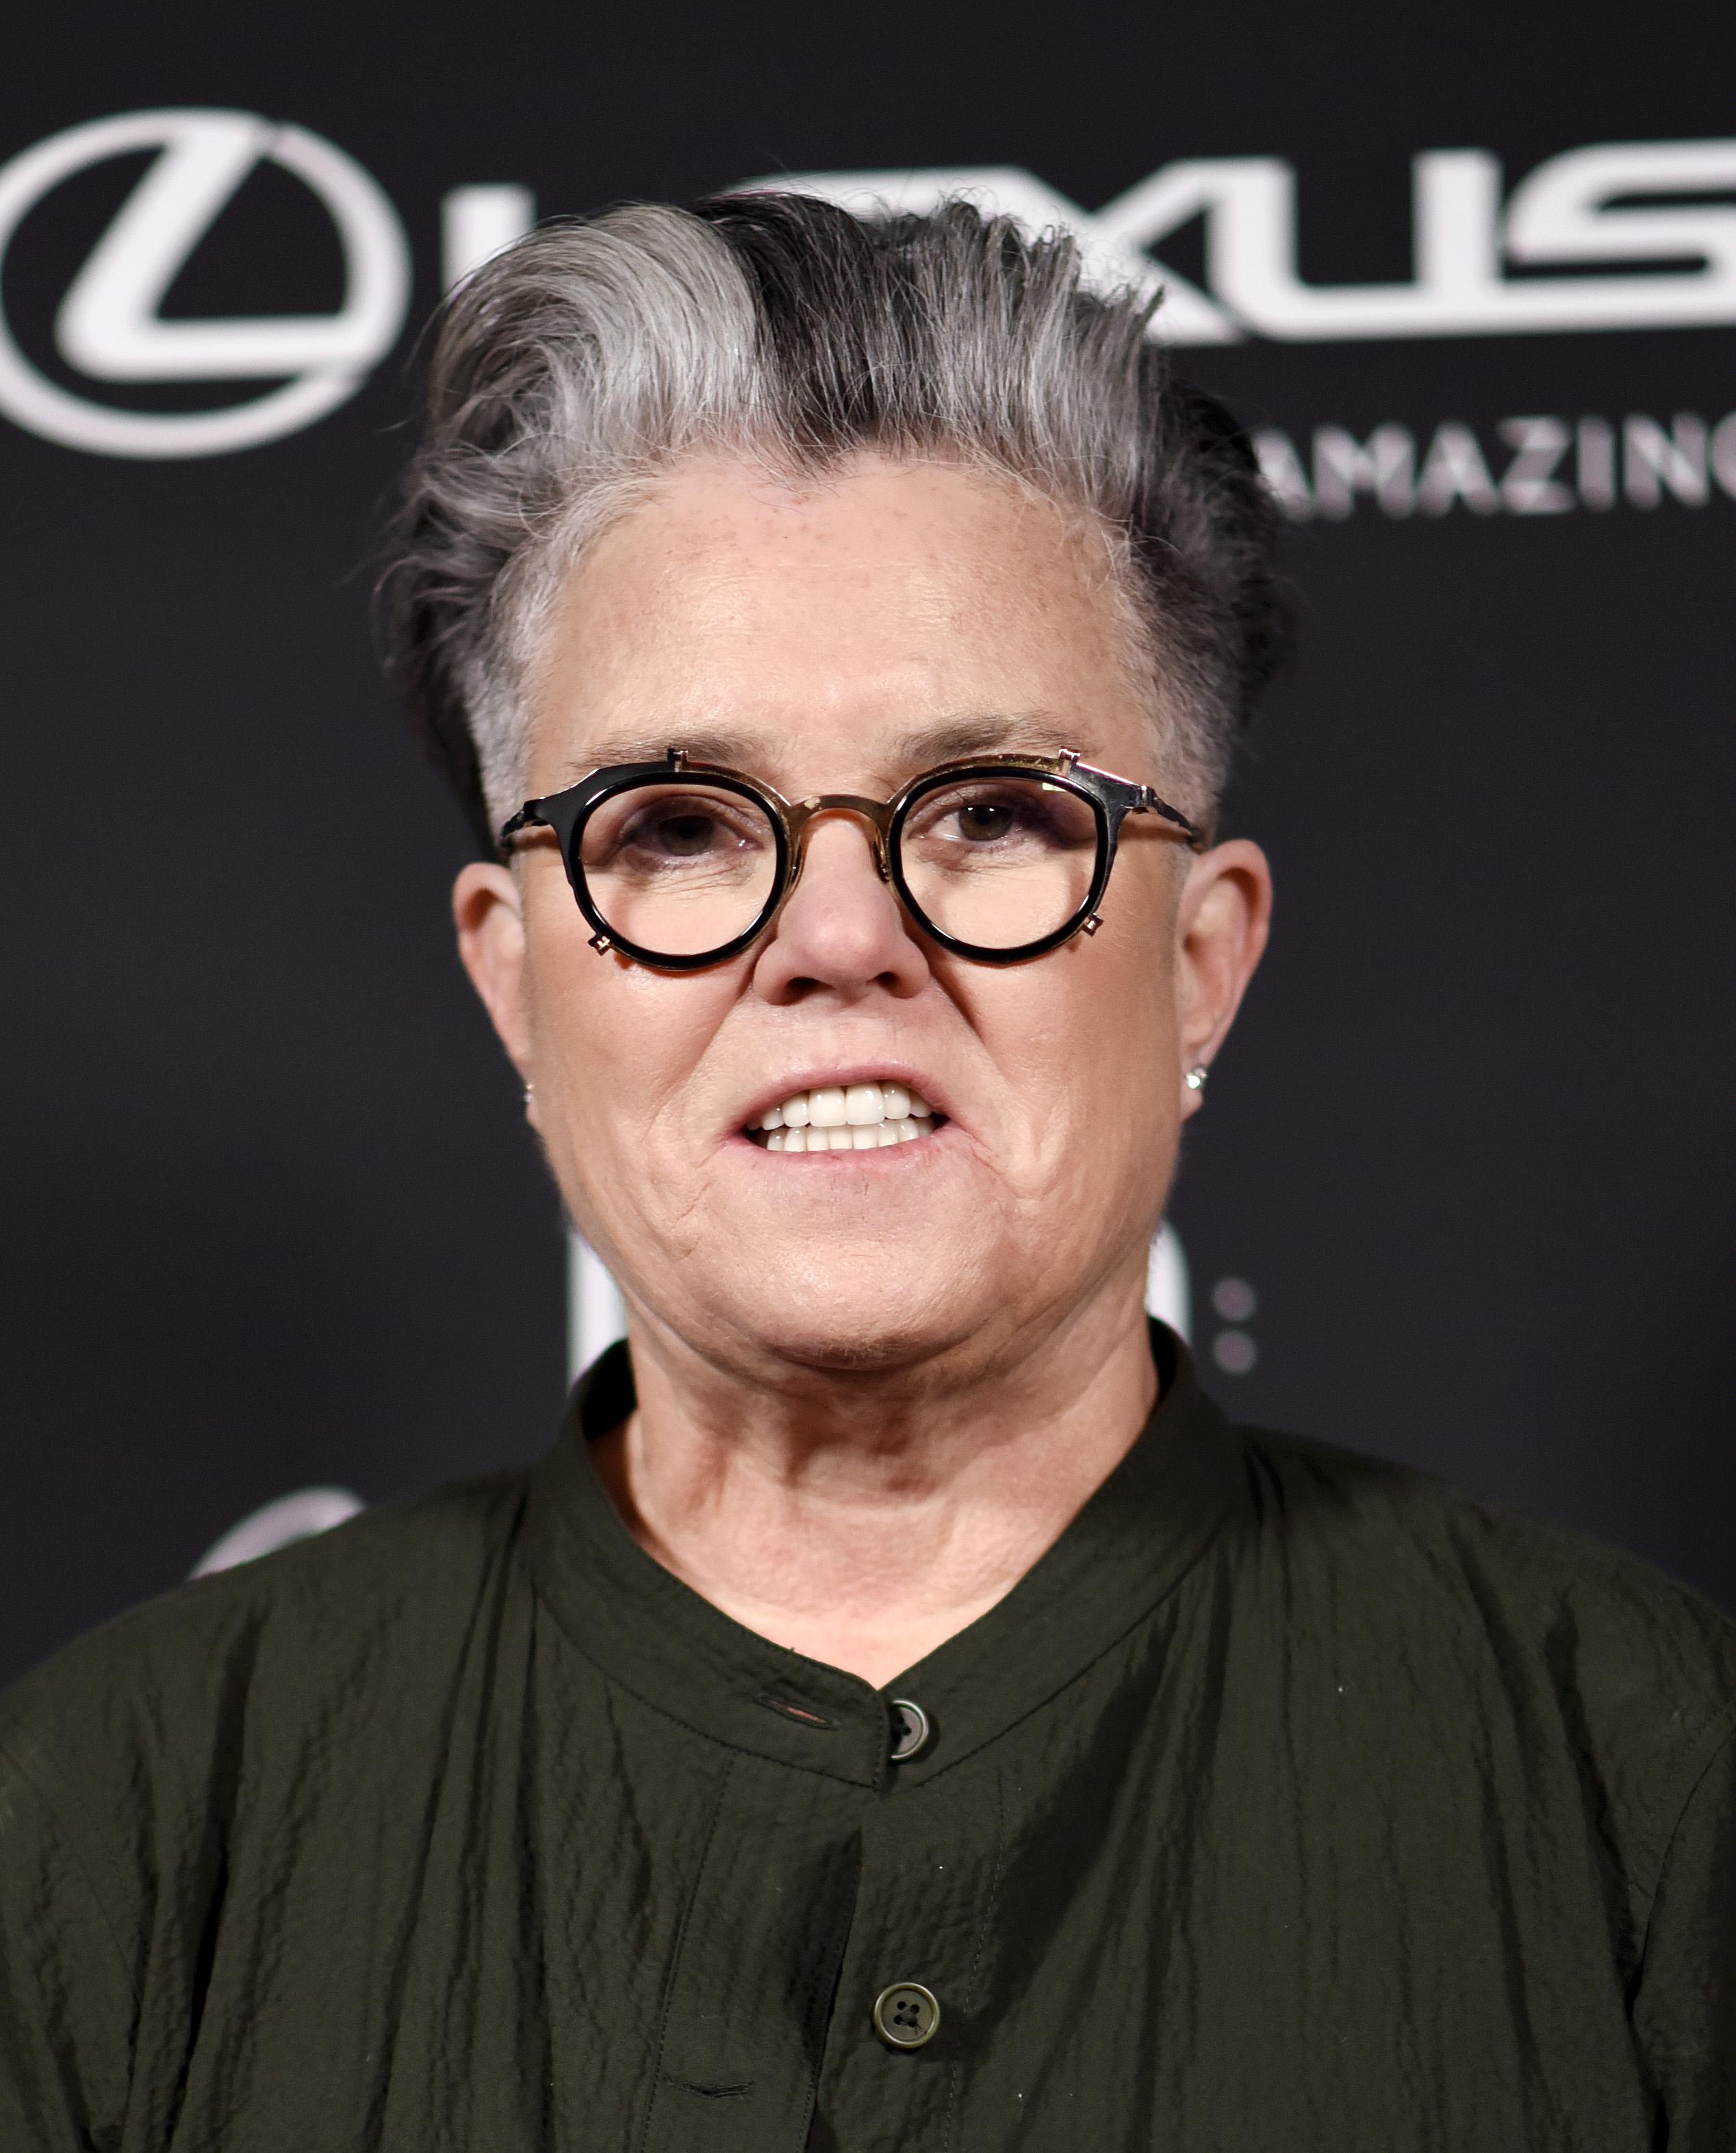 Rosie O'Donnell image